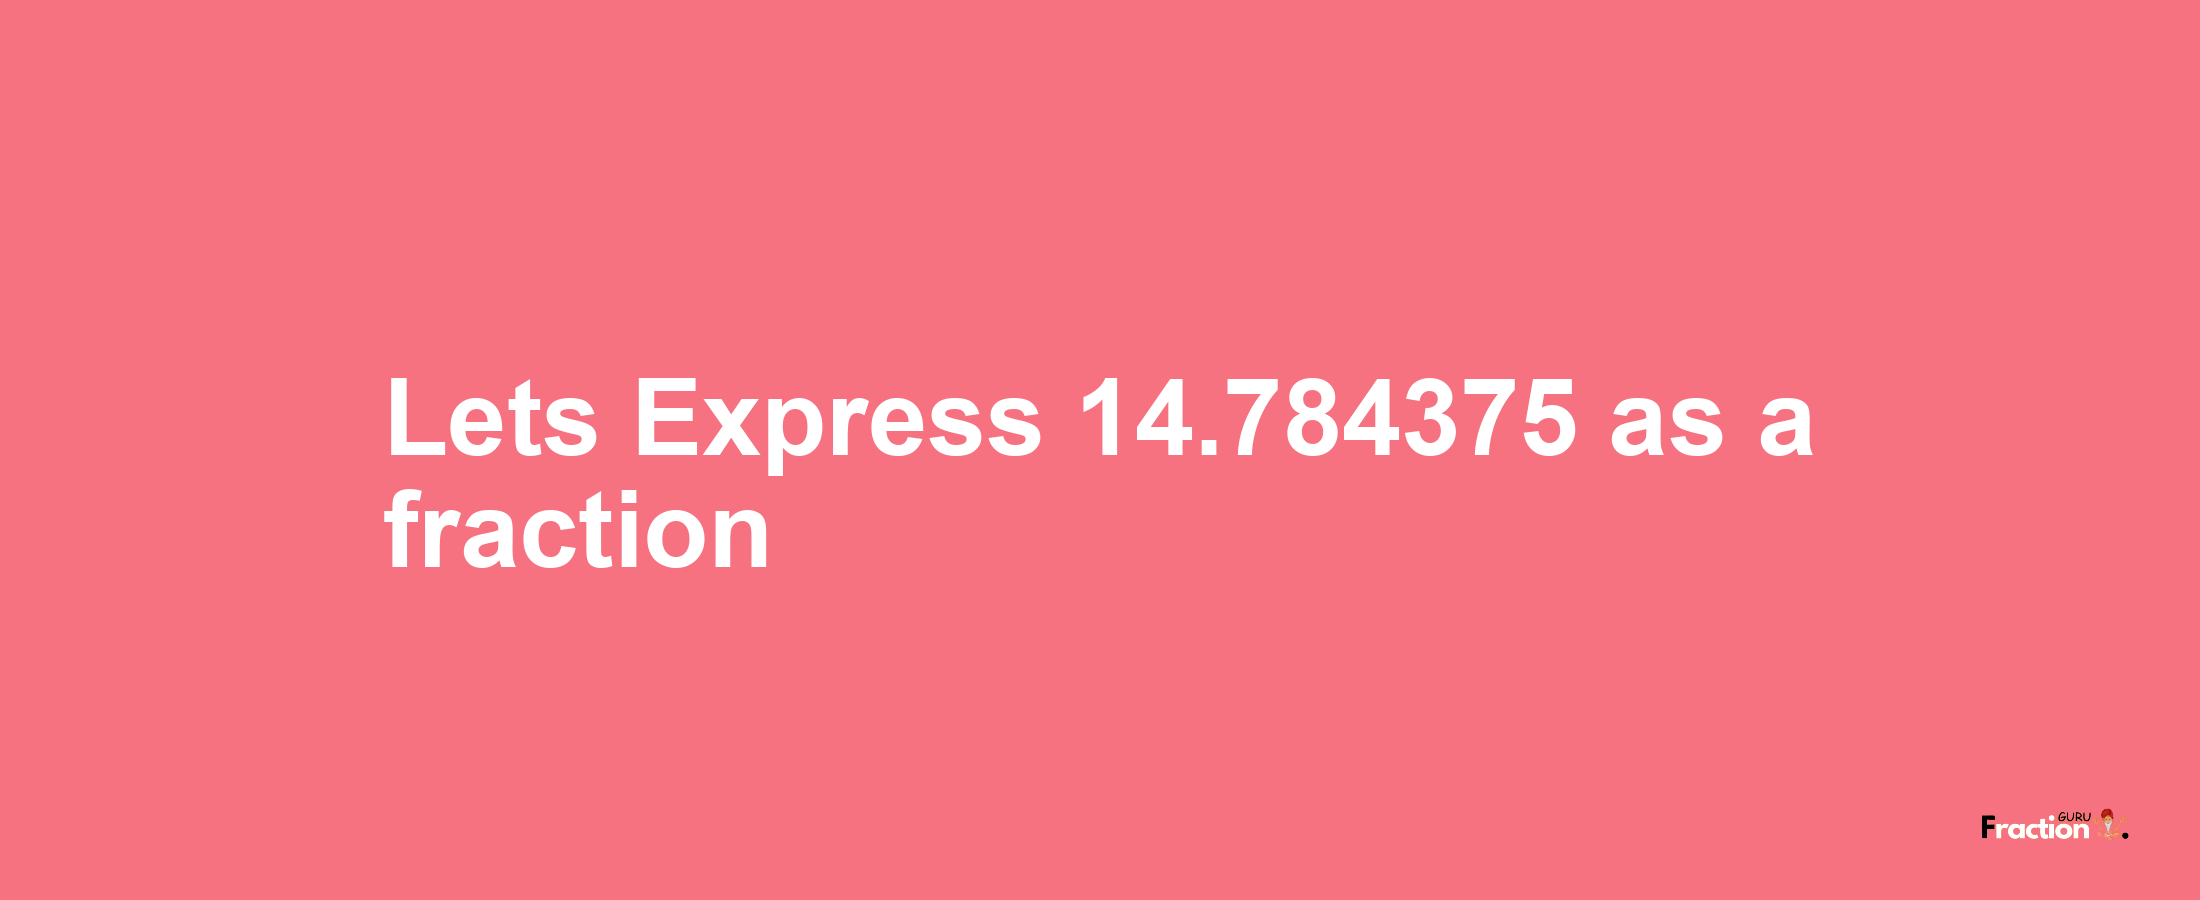 Lets Express 14.784375 as afraction